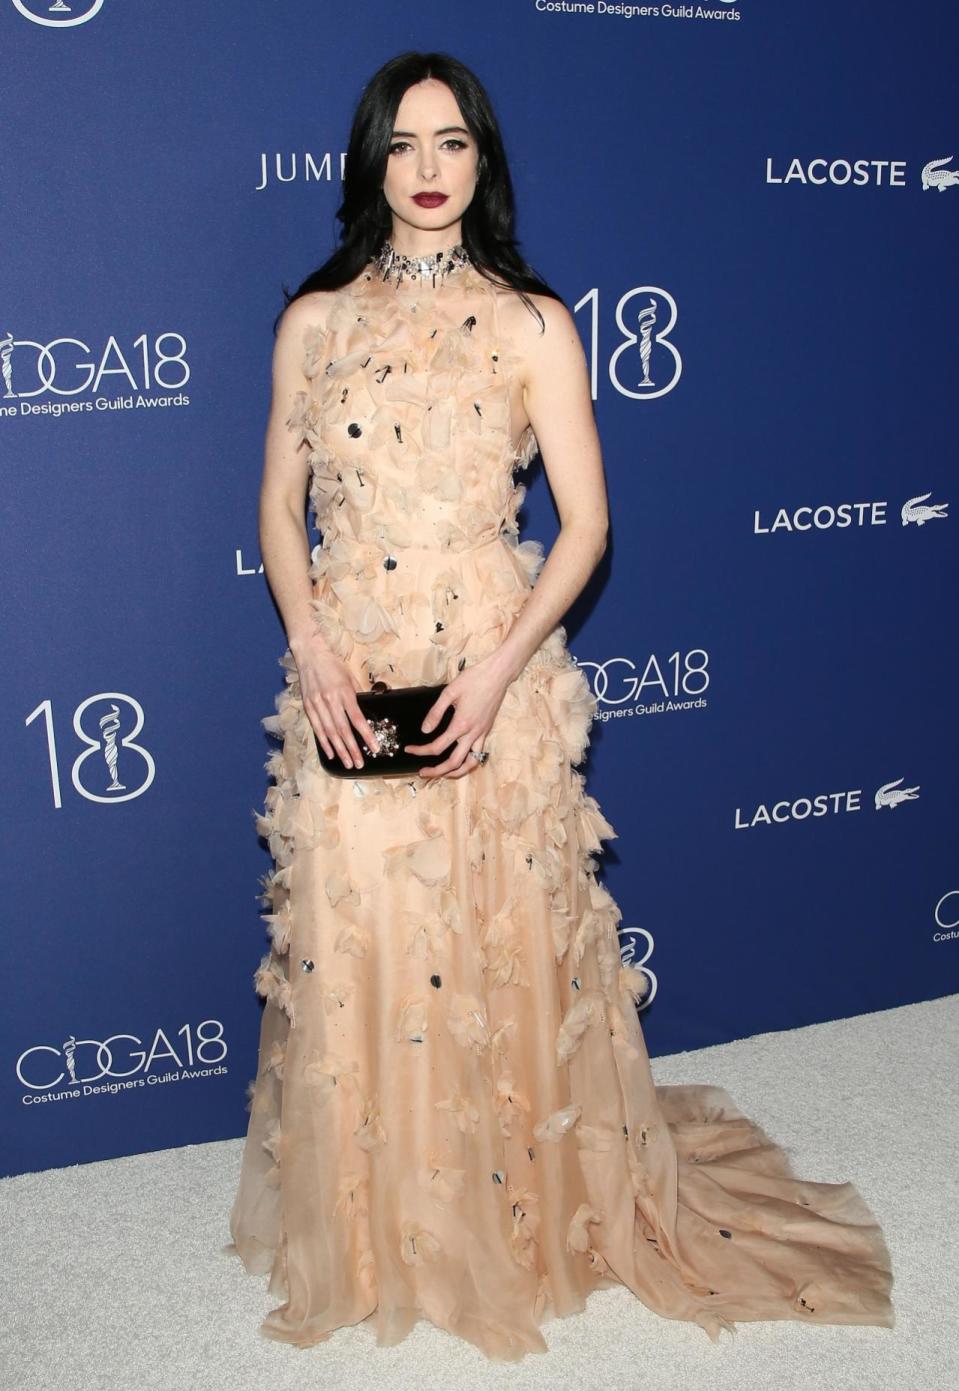 Krysten Ritter in Lela Rose at the 18th Costume Designers Guild Awards at the Beverly Hilton on Feb. 23, 2016, in Beverly Hills, Calif.